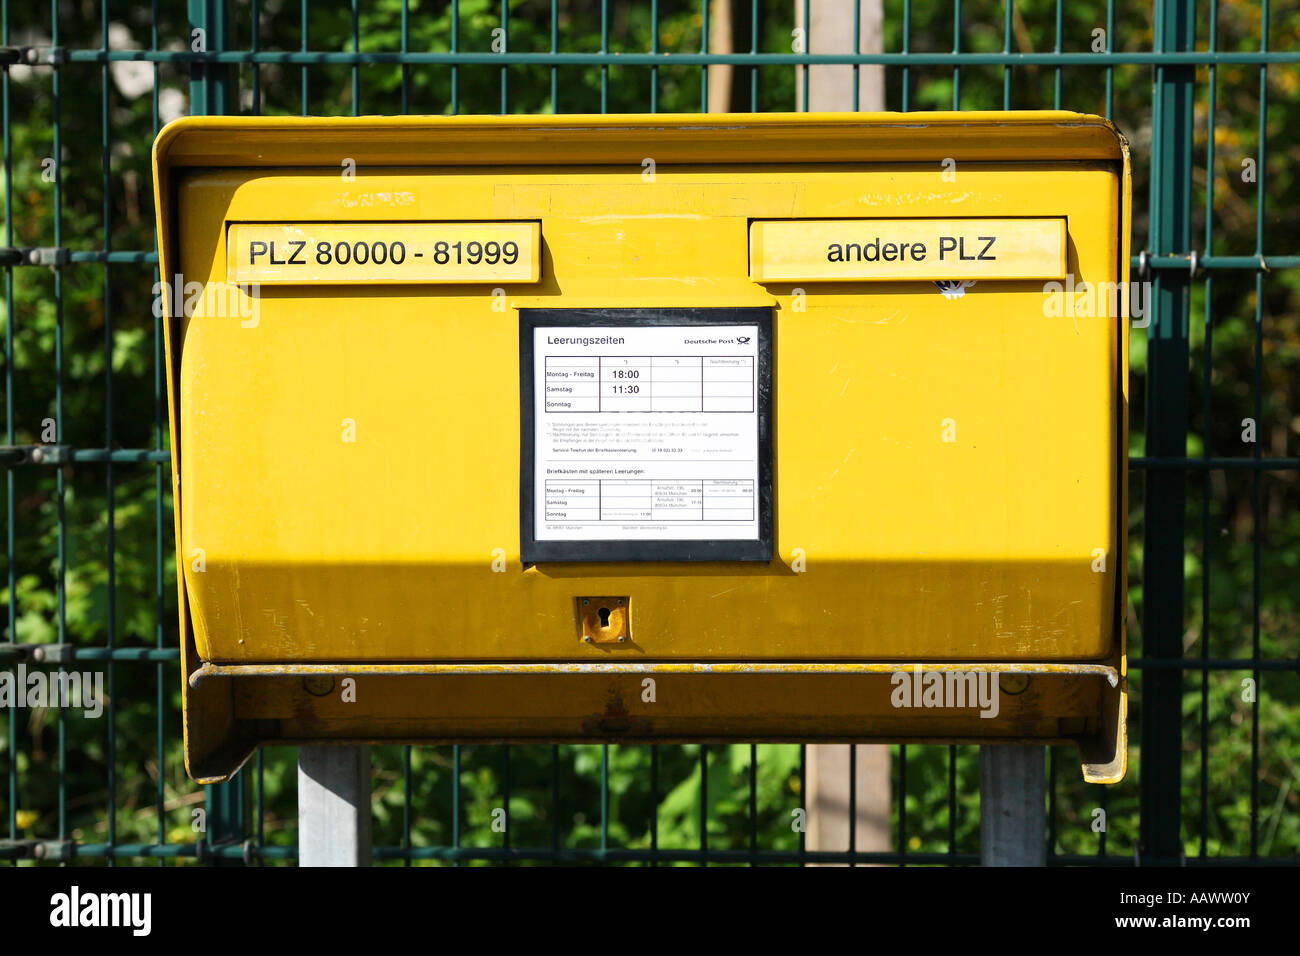 Briefkasten Leerung High Resolution Stock Photography and Images - Alamy